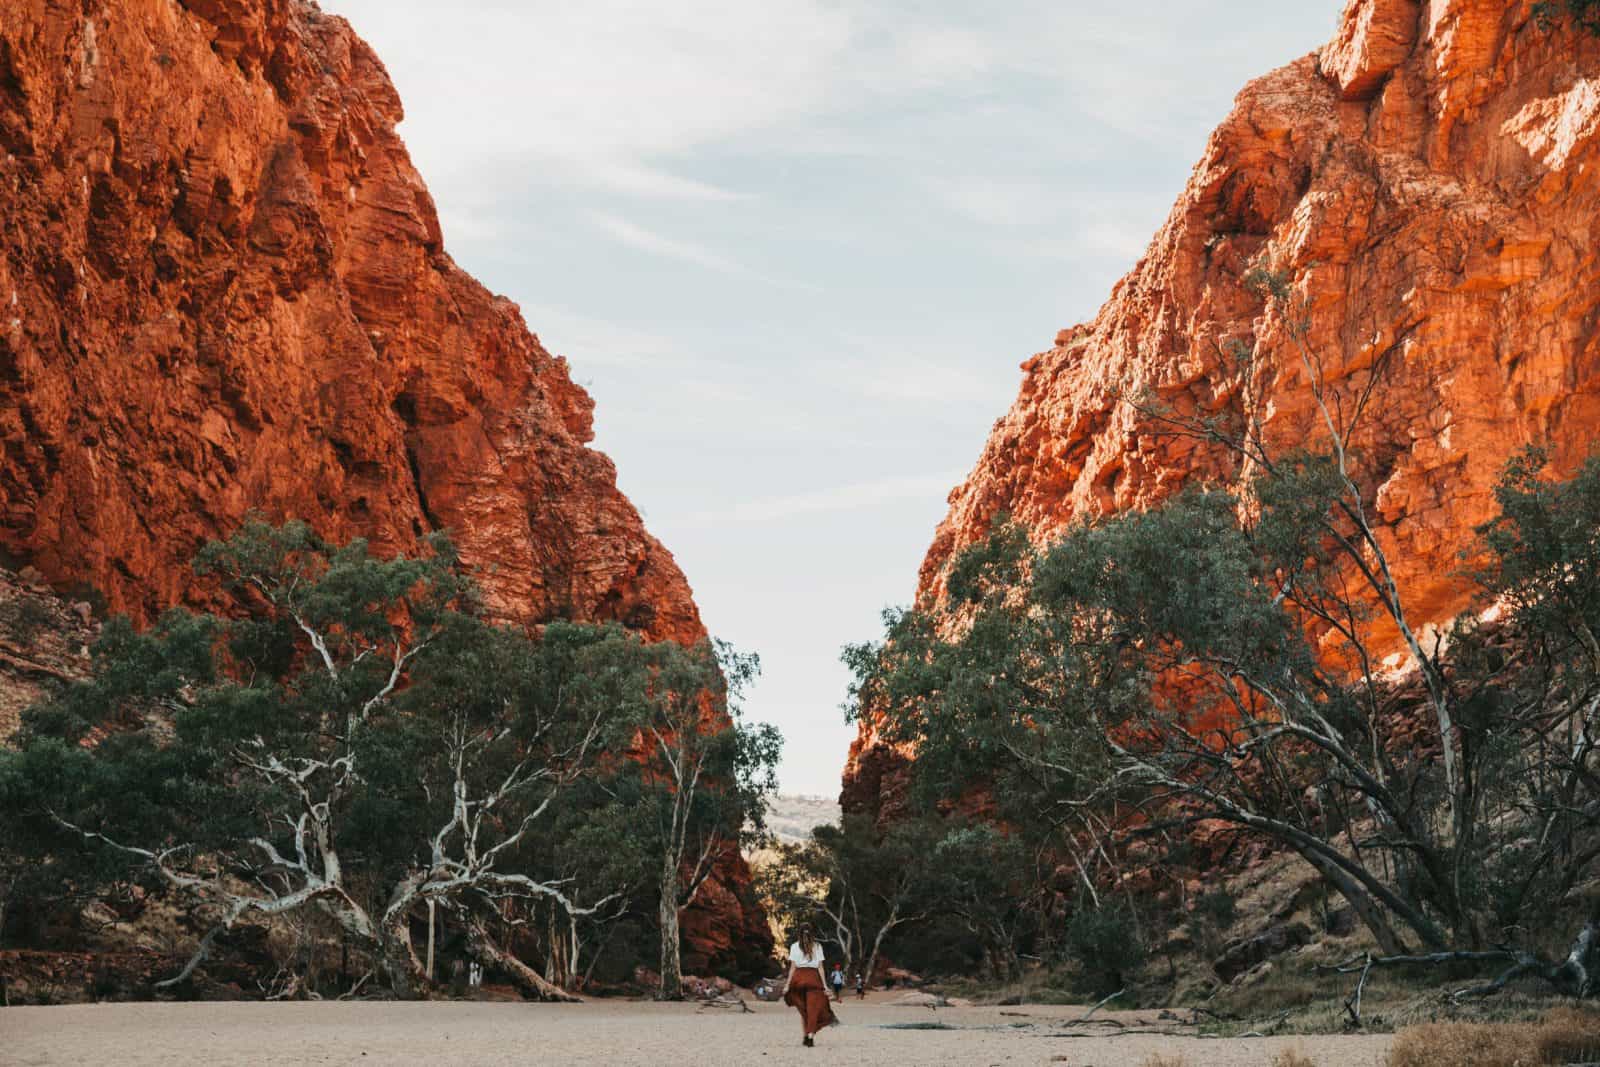 A woman walking in the dry river bed towards the enormous red escarpments of Simpsons Gap